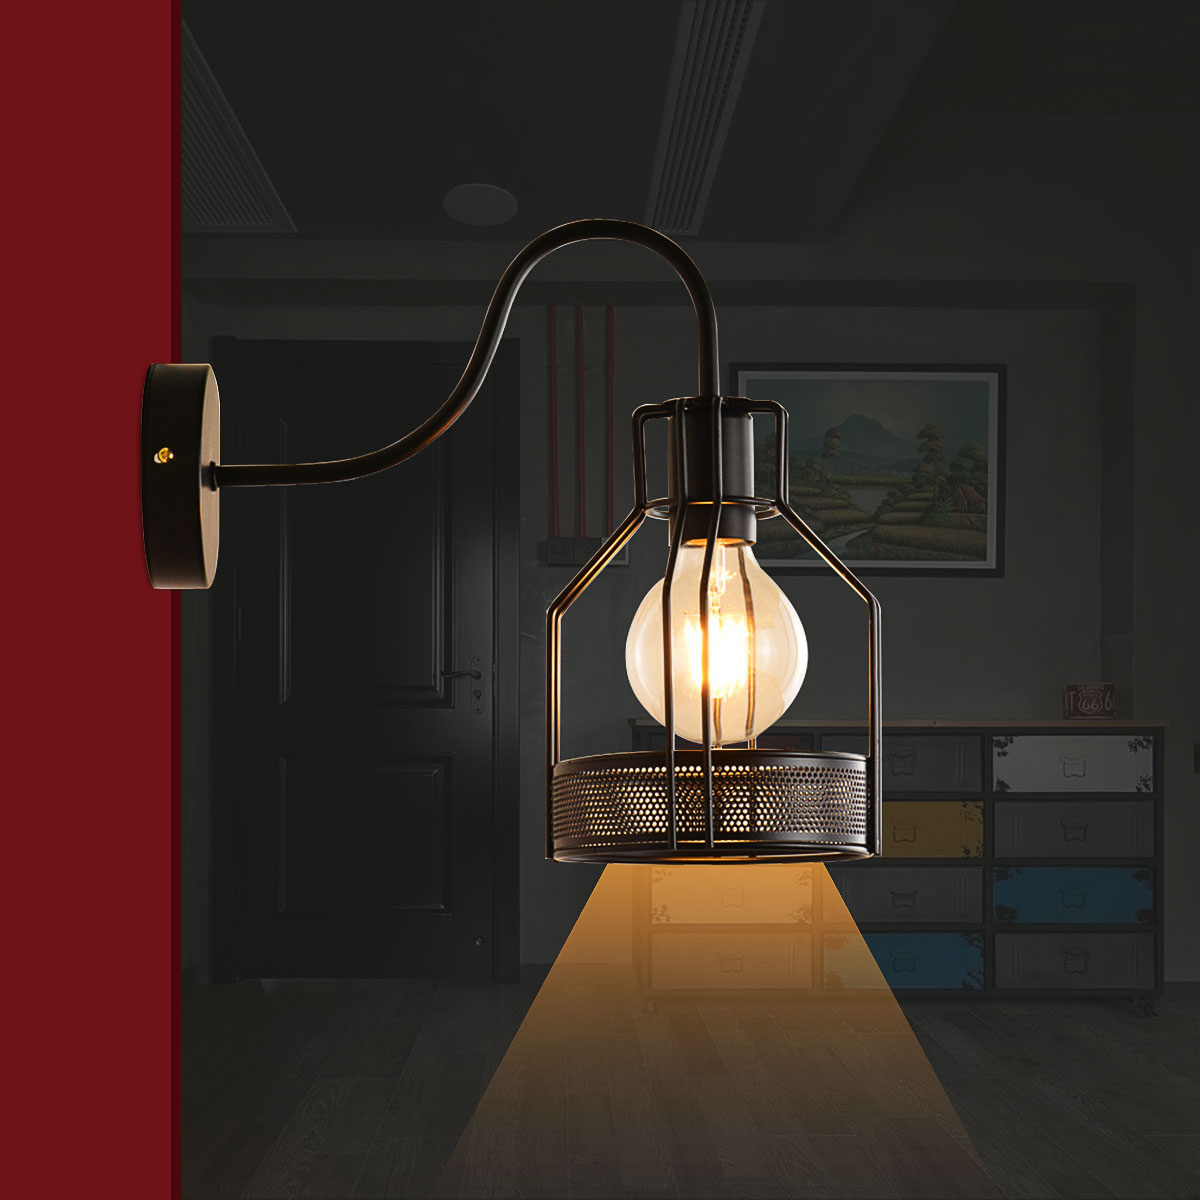 Find E27 Retro Wall Lamp Vintage Bedroom Bar Sconce Light Indoor Fixture Home Decoration AC110 240V for Sale on Gipsybee.com with cryptocurrencies